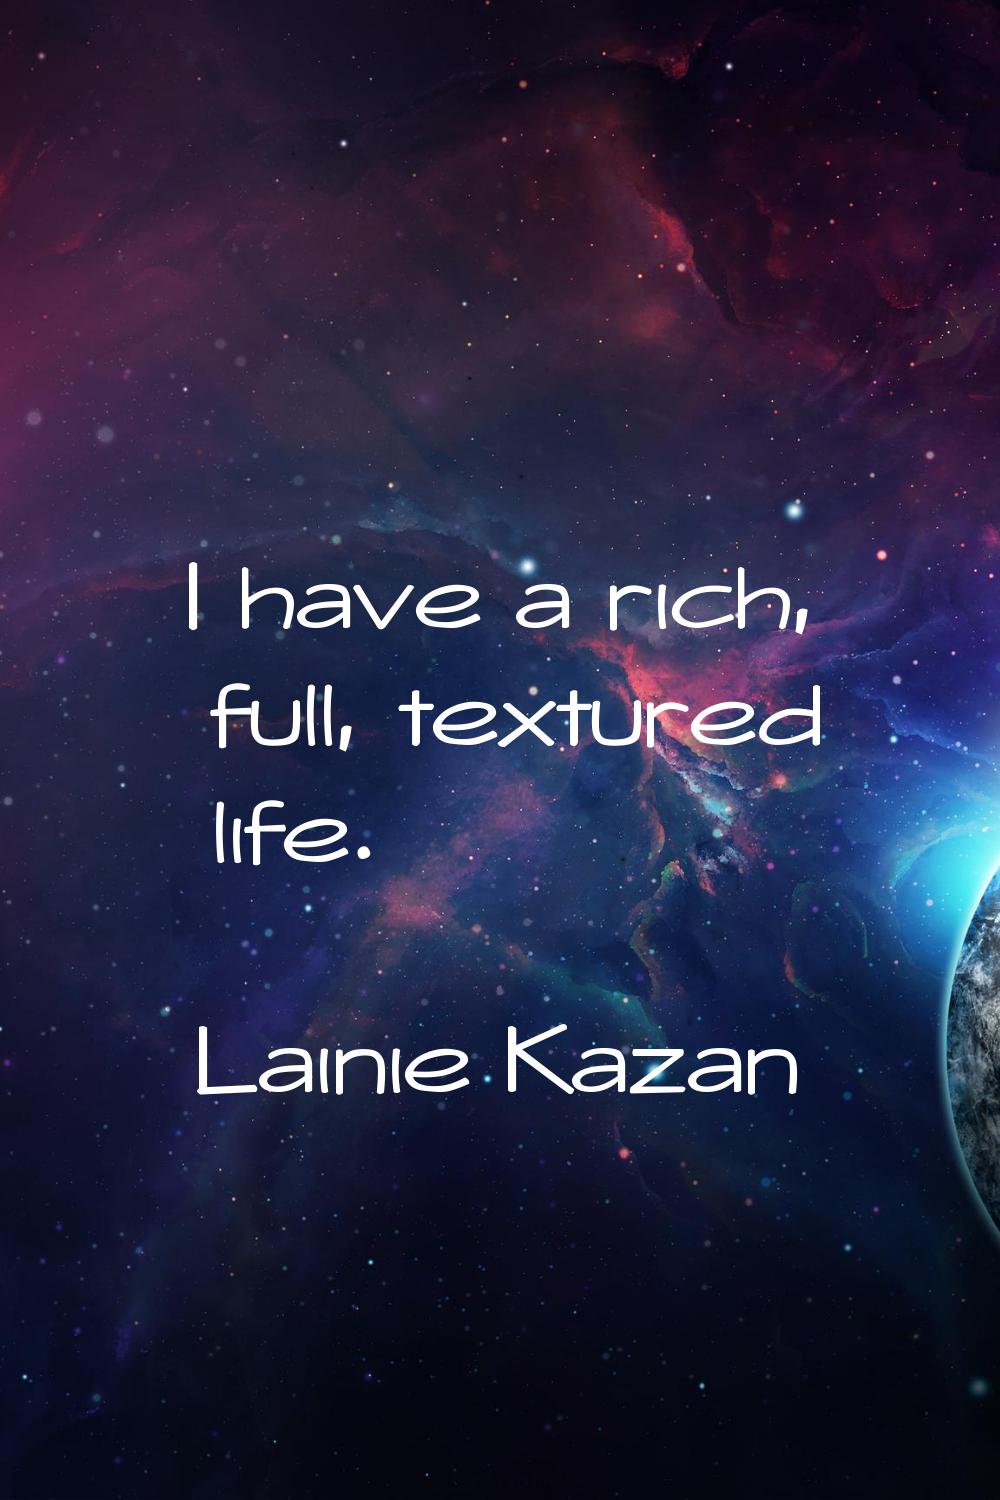 I have a rich, full, textured life.